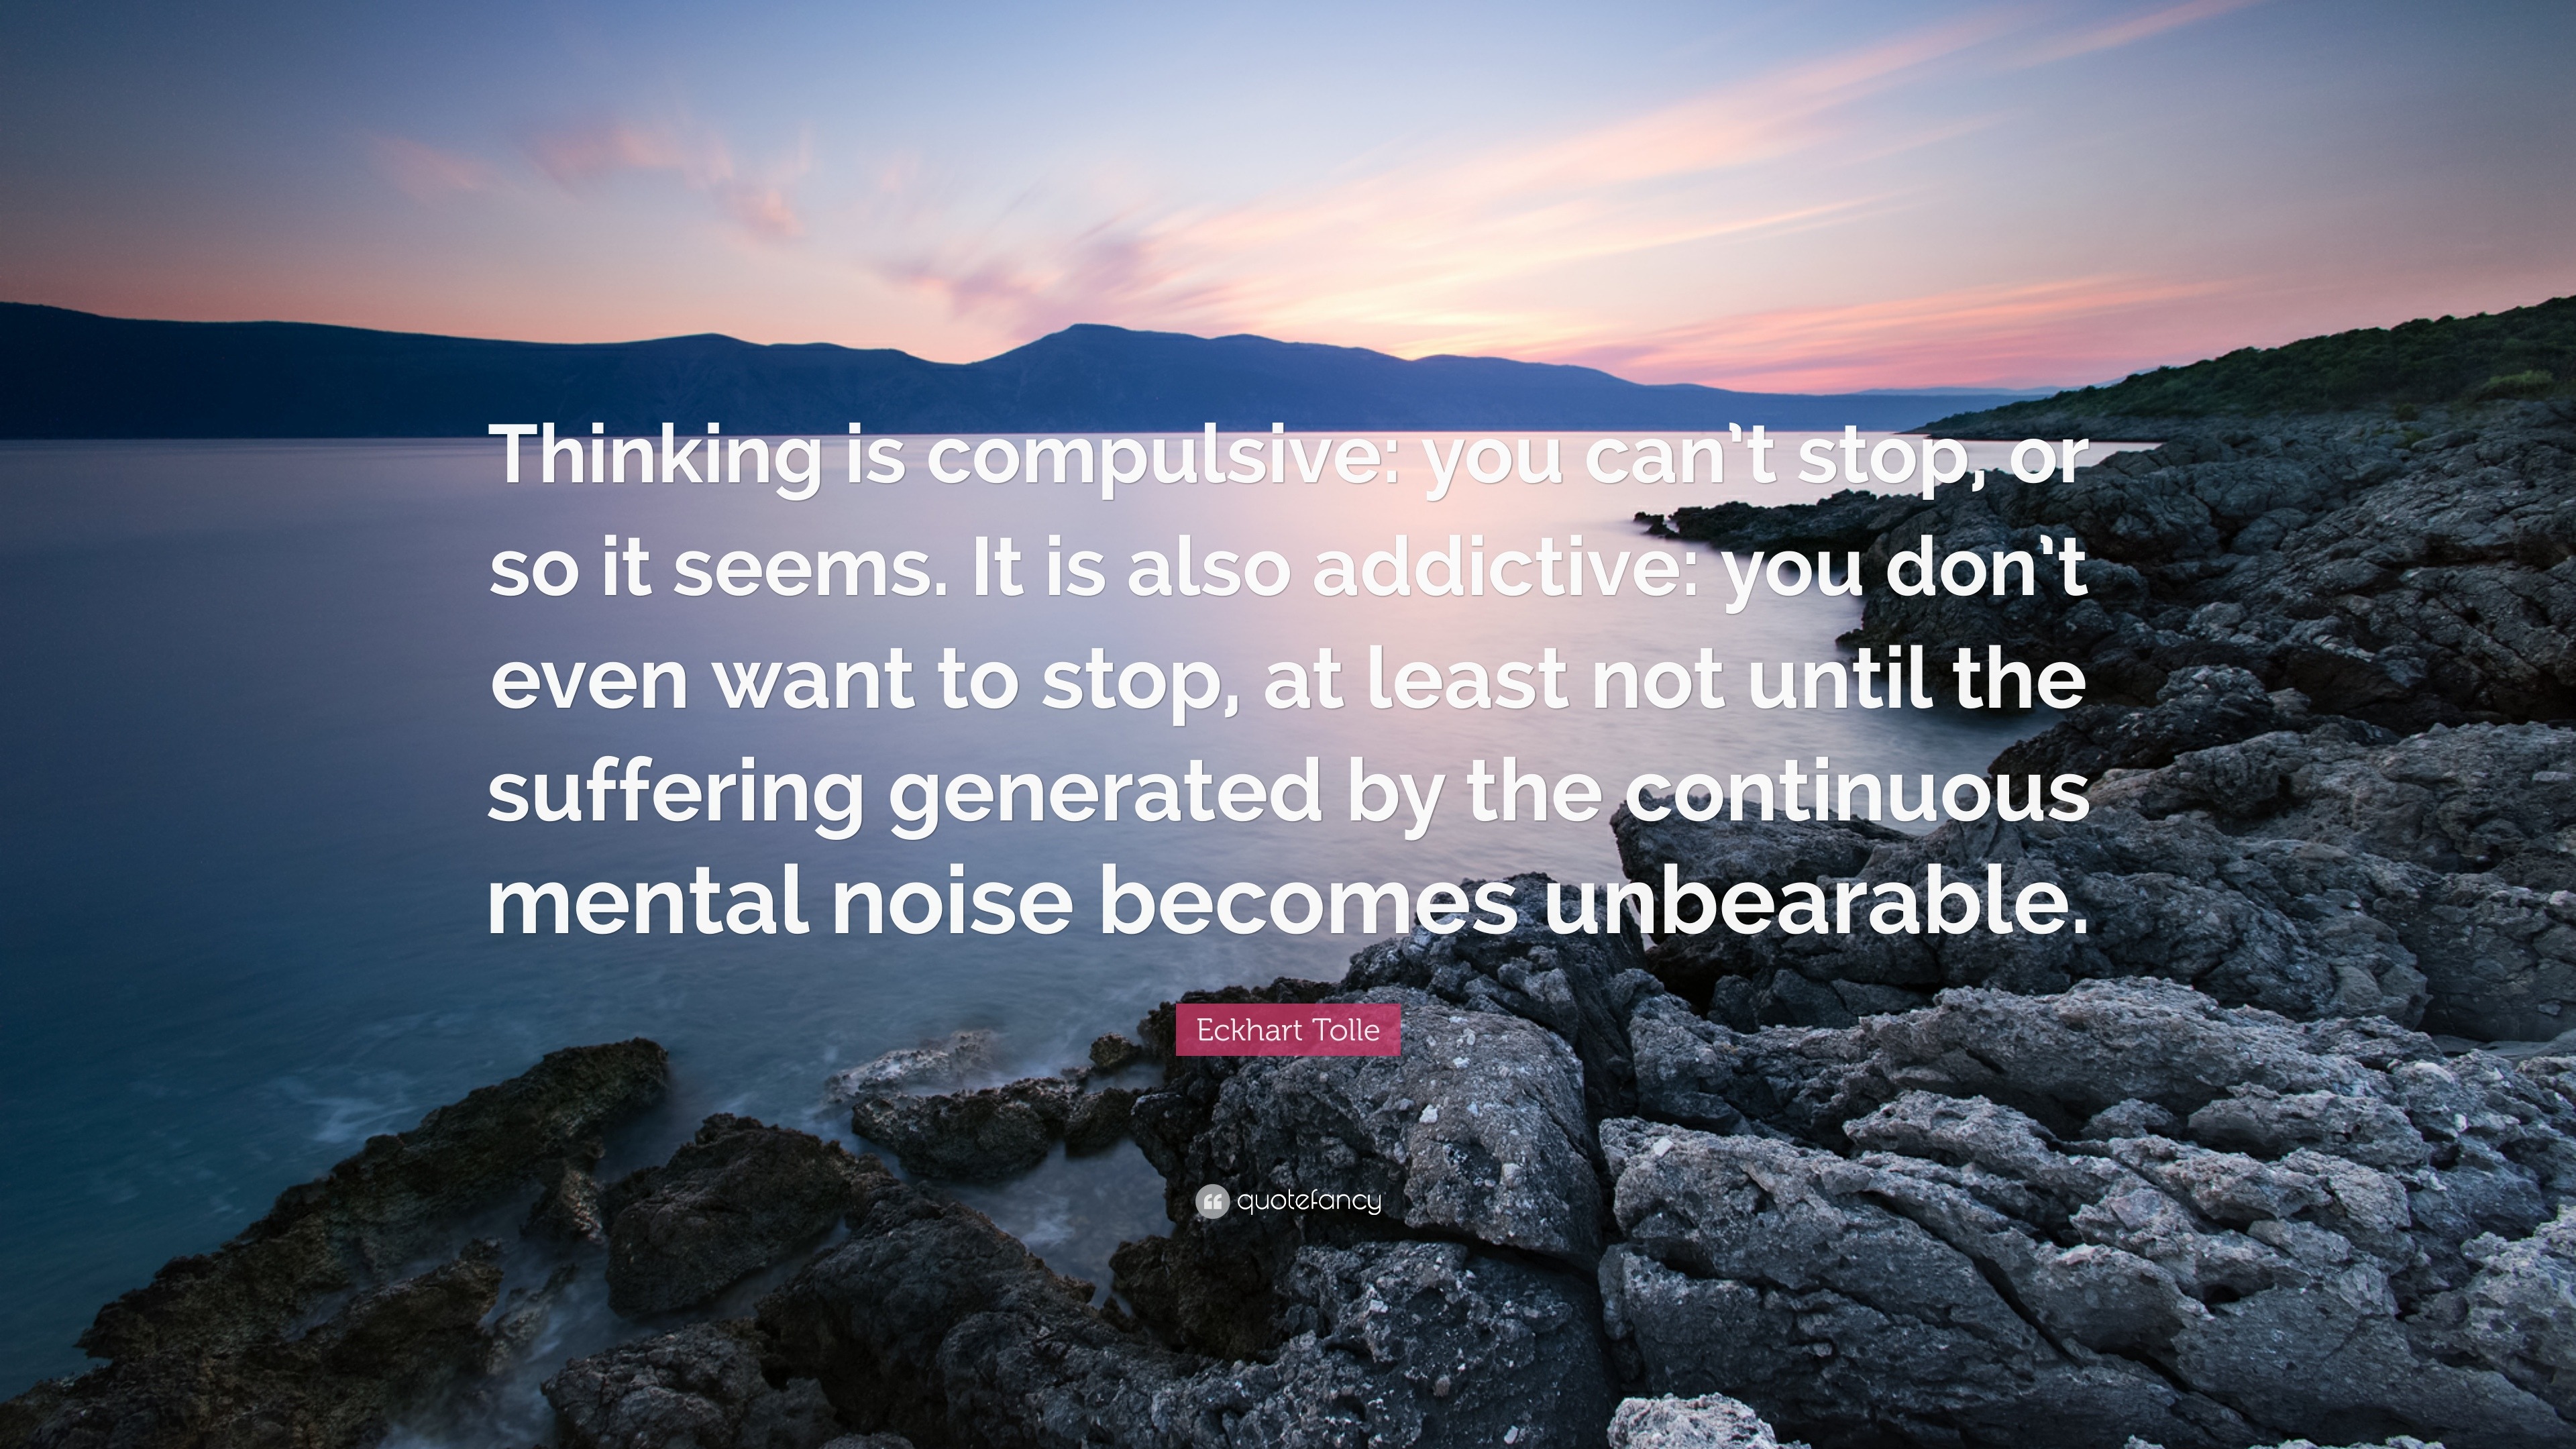 Eckhart Tolle Quote: “Thinking is compulsive: you can’t stop, or so it ...